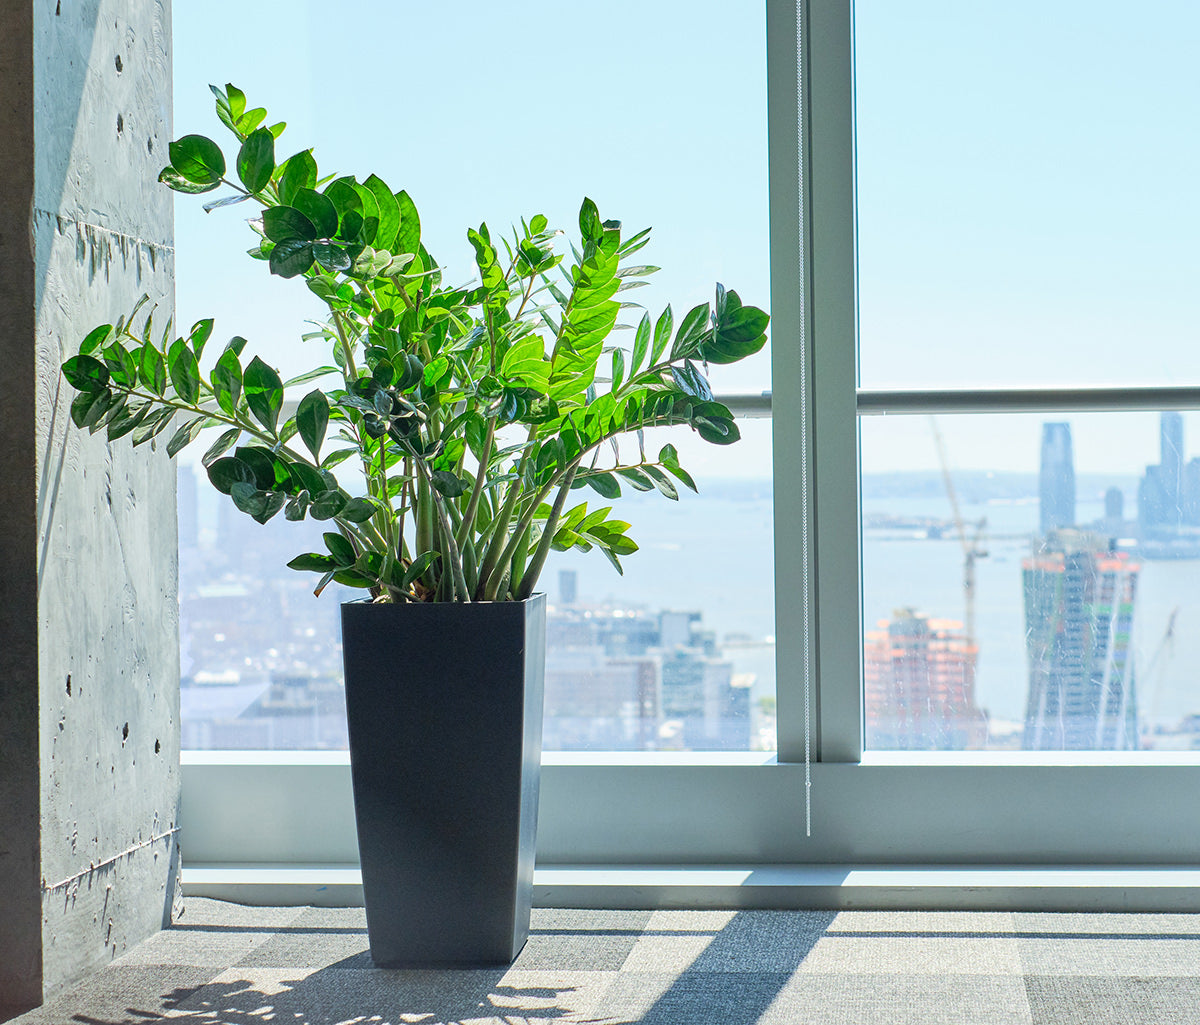 How to choose the right plants for your office